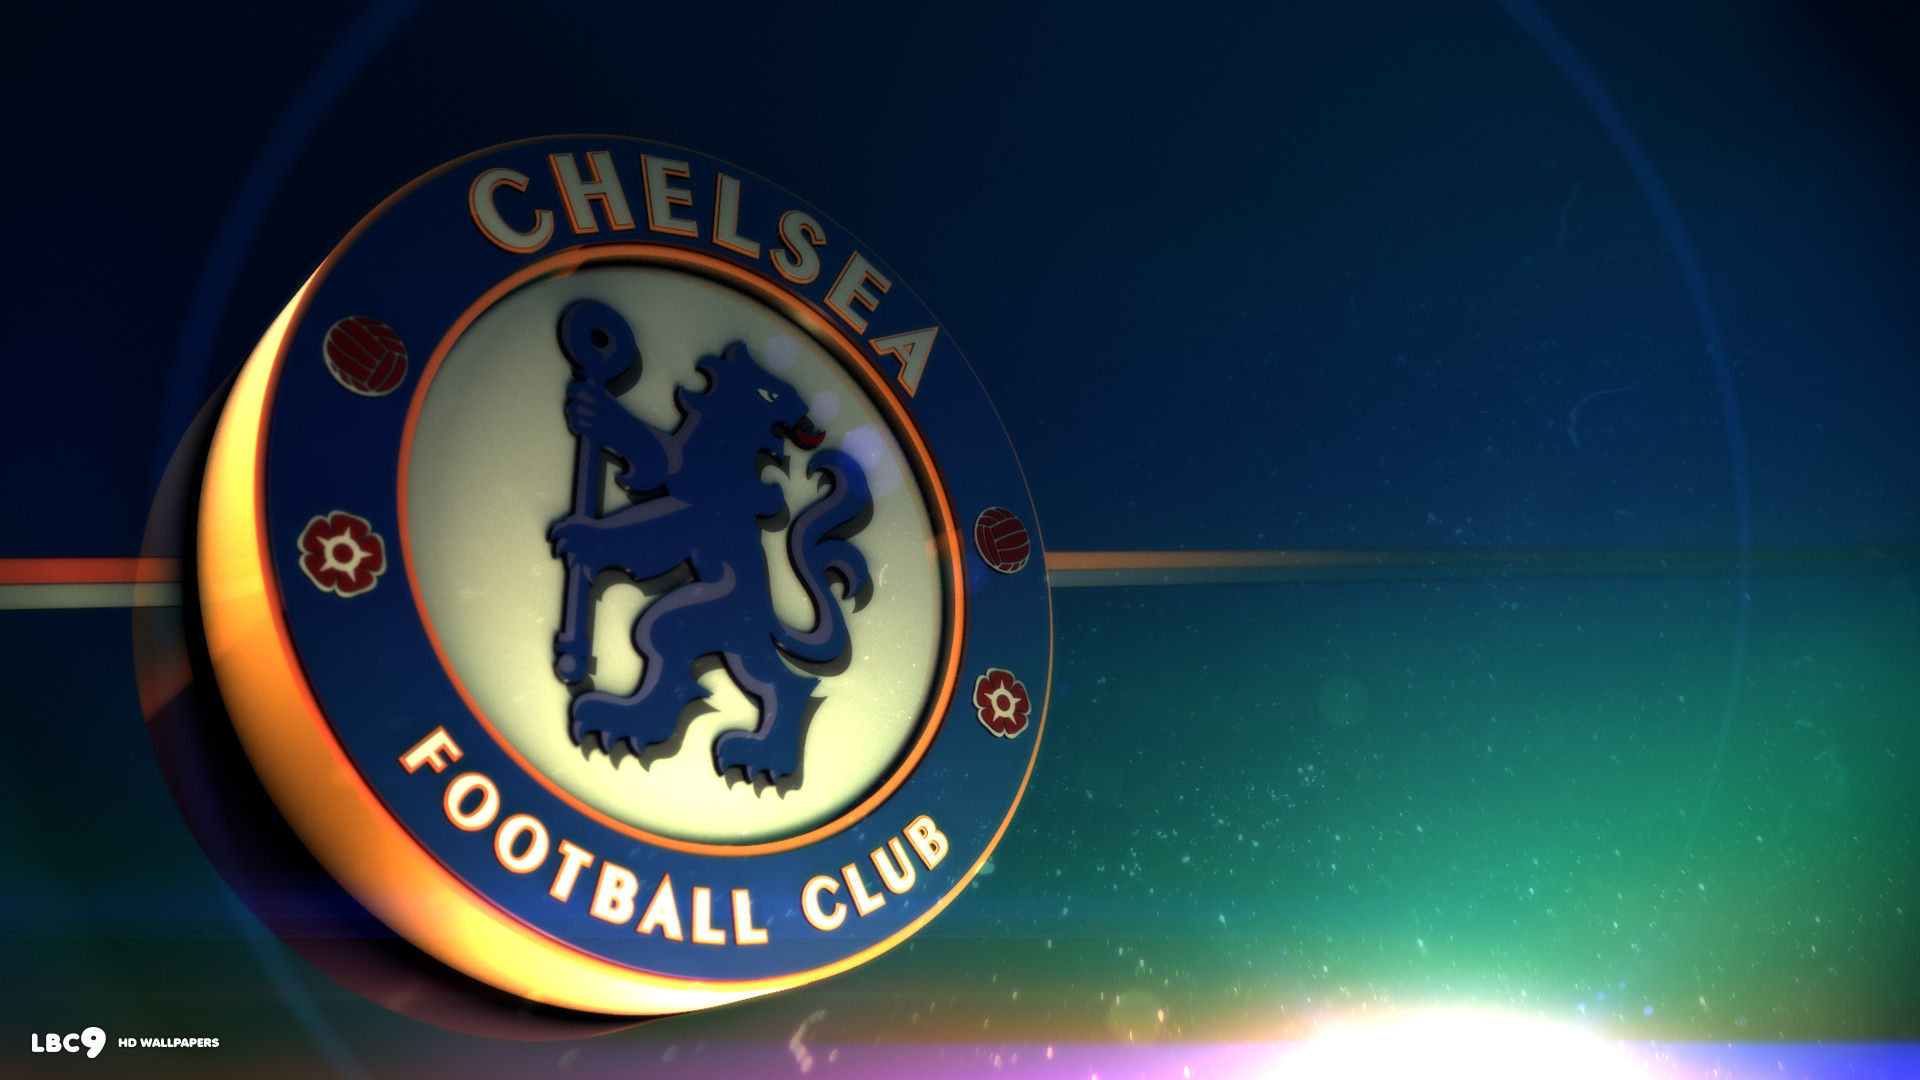 Chelsea F C Wallpaper And Windows Theme All For